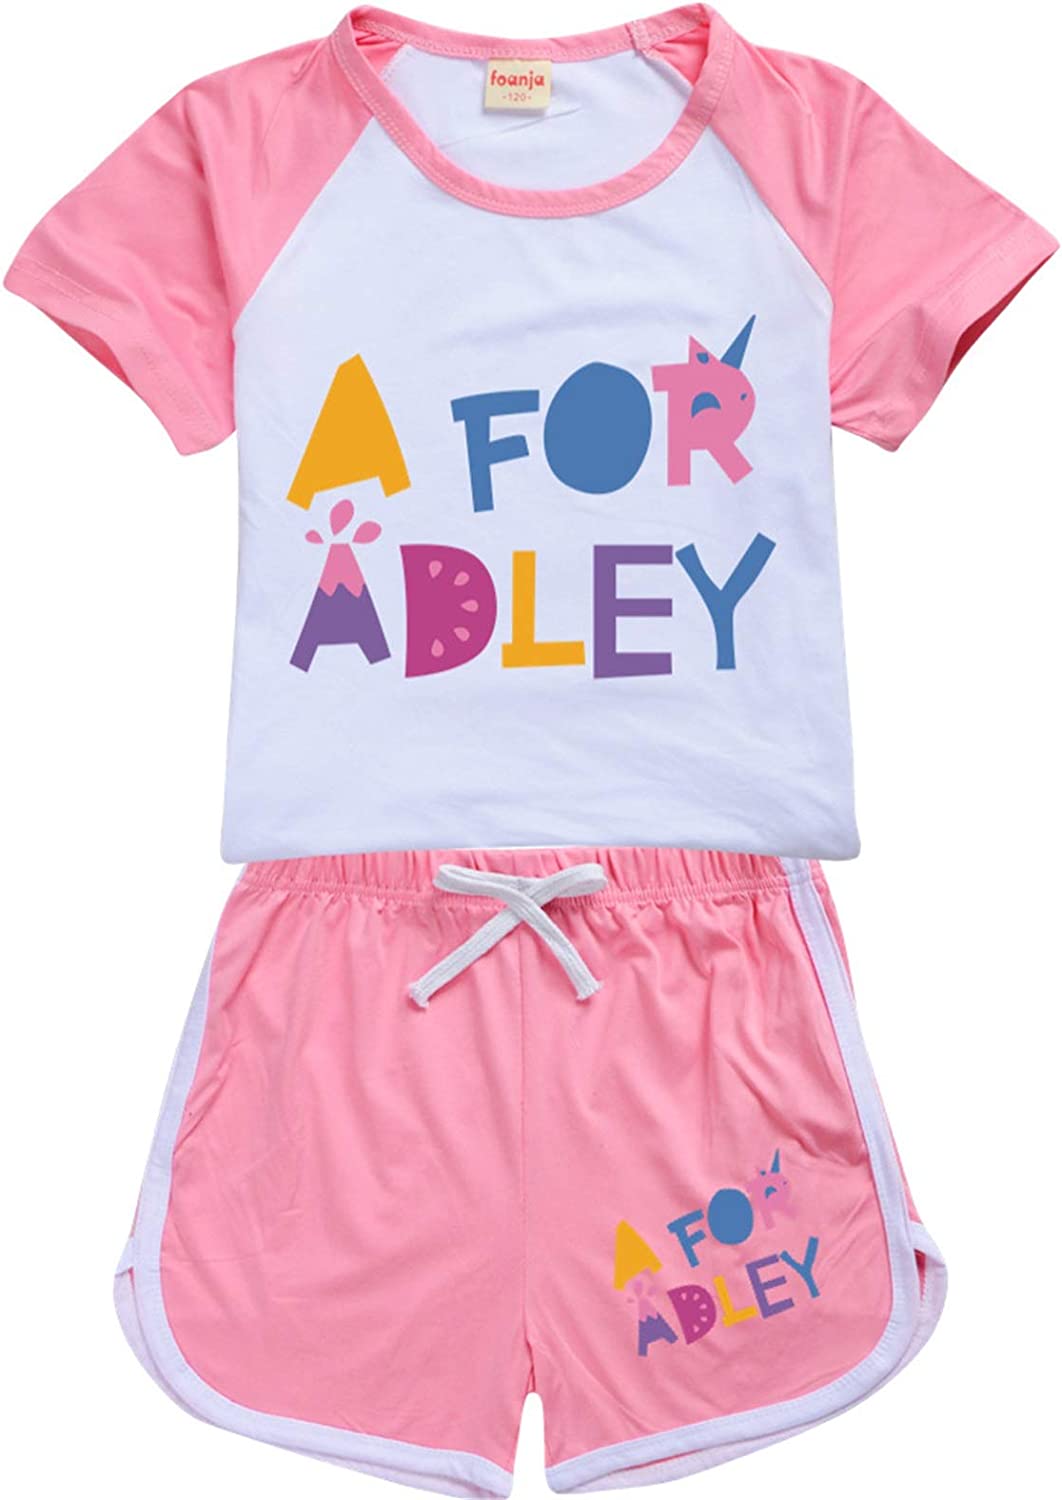 A for Adley Official Merchandise: Ignite Your Child’s Creativity